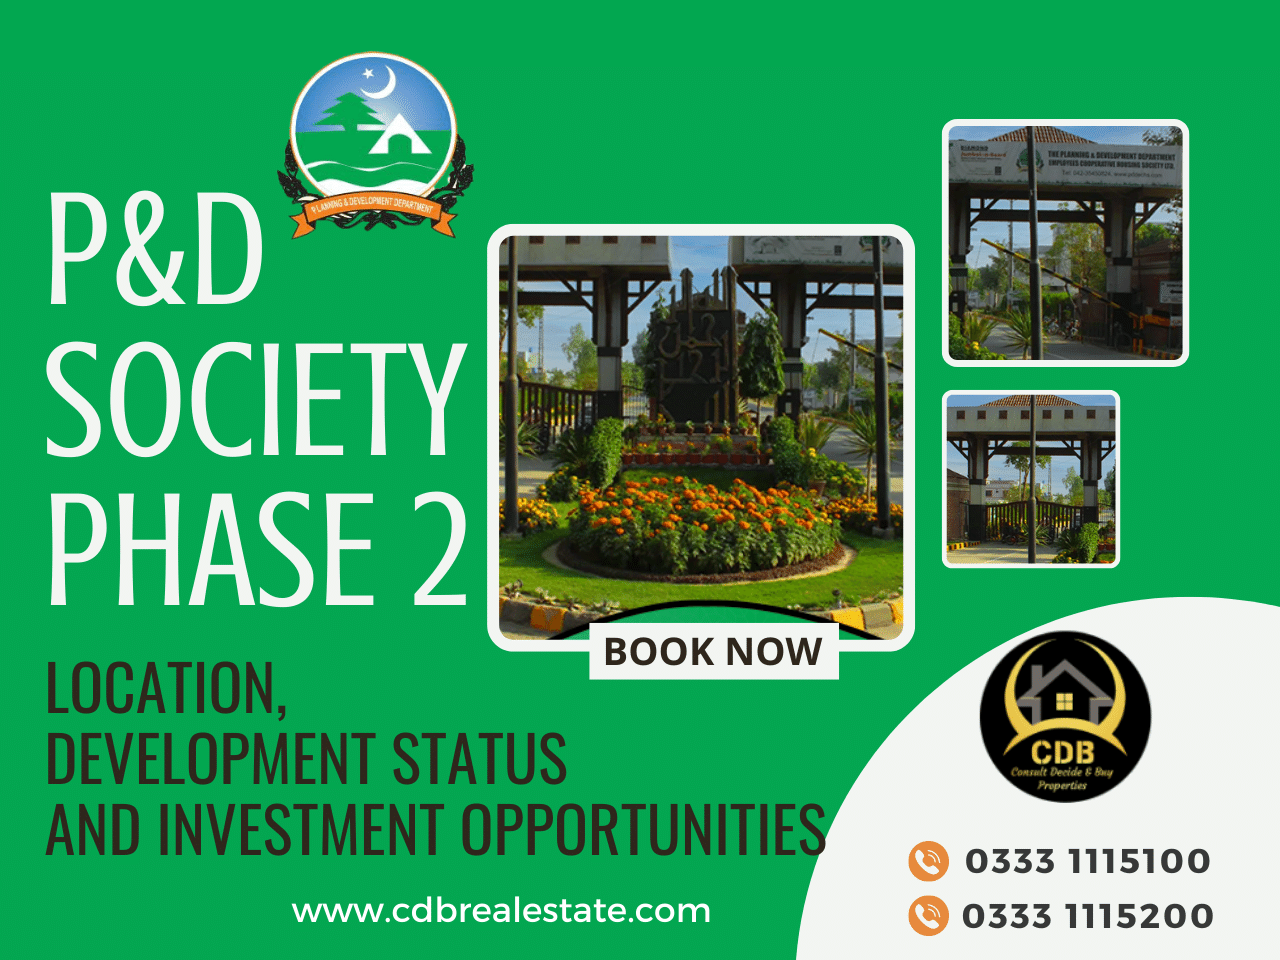 P&D Society Phase 2 Location, Development Status and Investment Opportunities